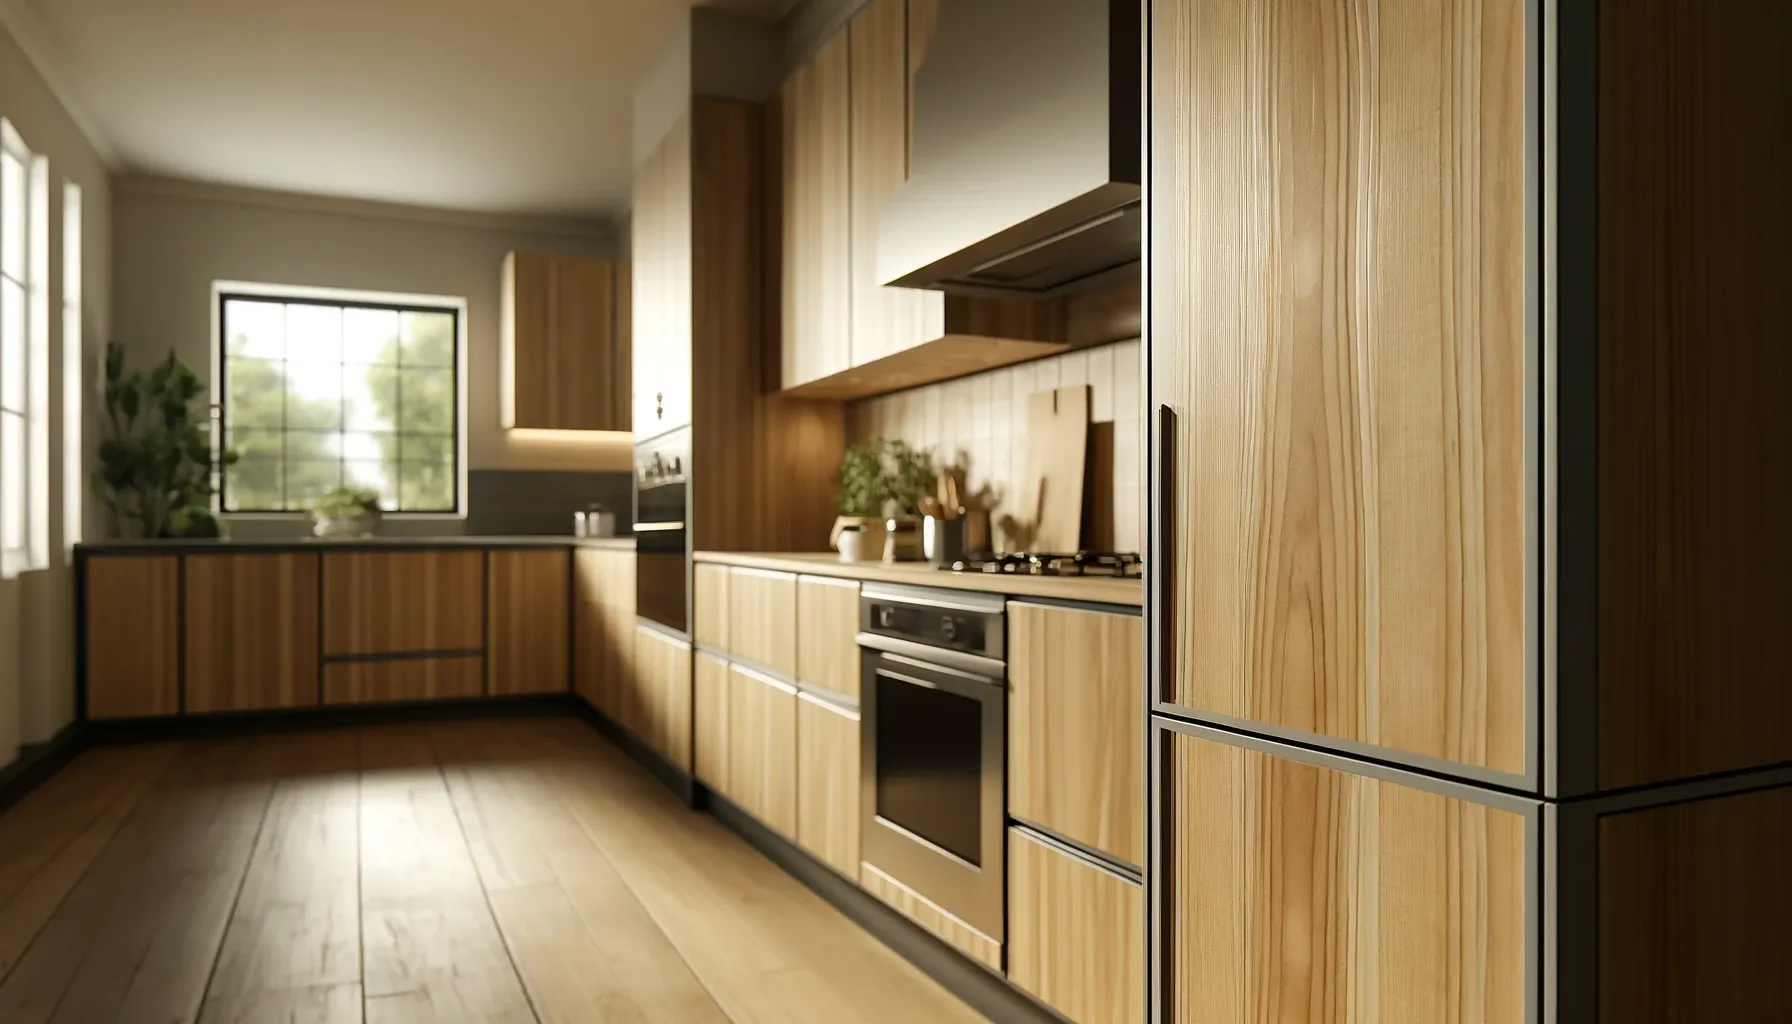 Wood veneer can be utilized to elevate any area by giving it a sophisticated appearance and feel similar to real wood.